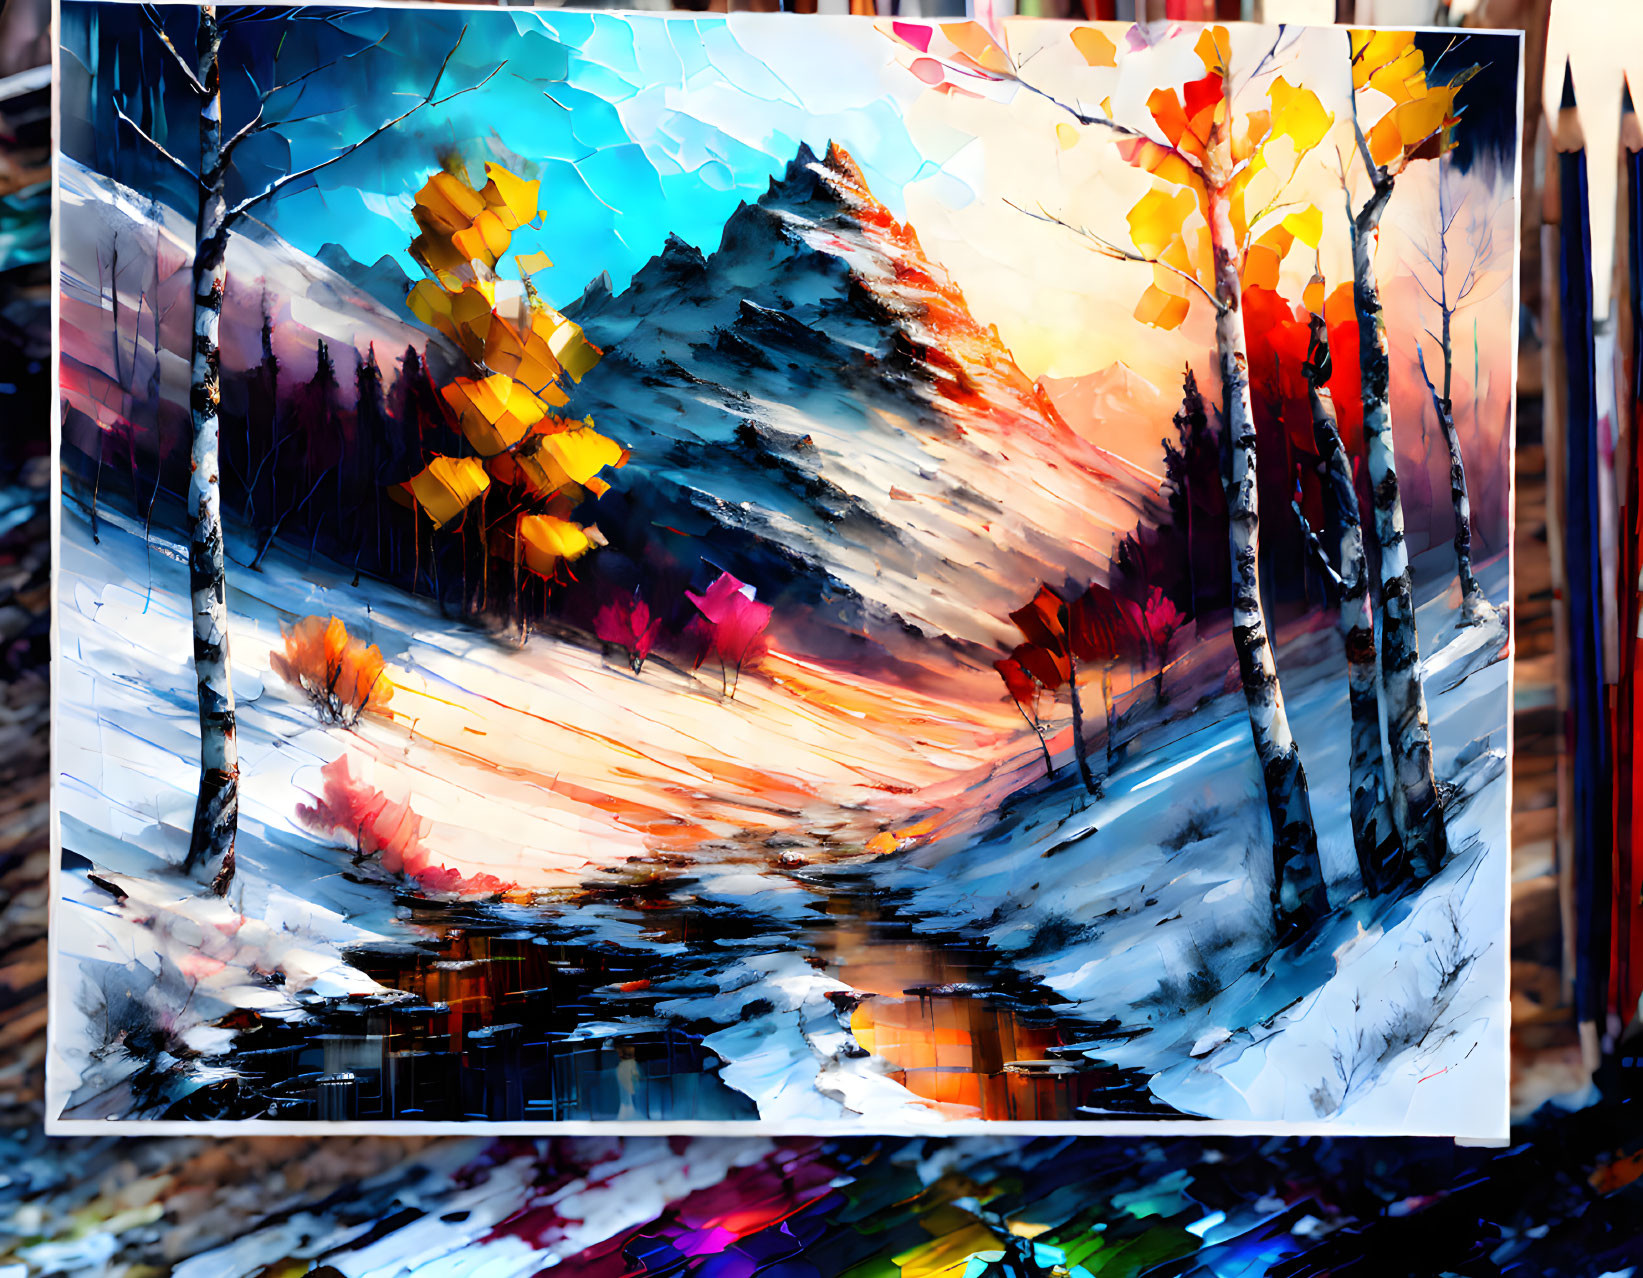 Colorful Impressionistic Mountain Landscape Painting with Snow and Foliage